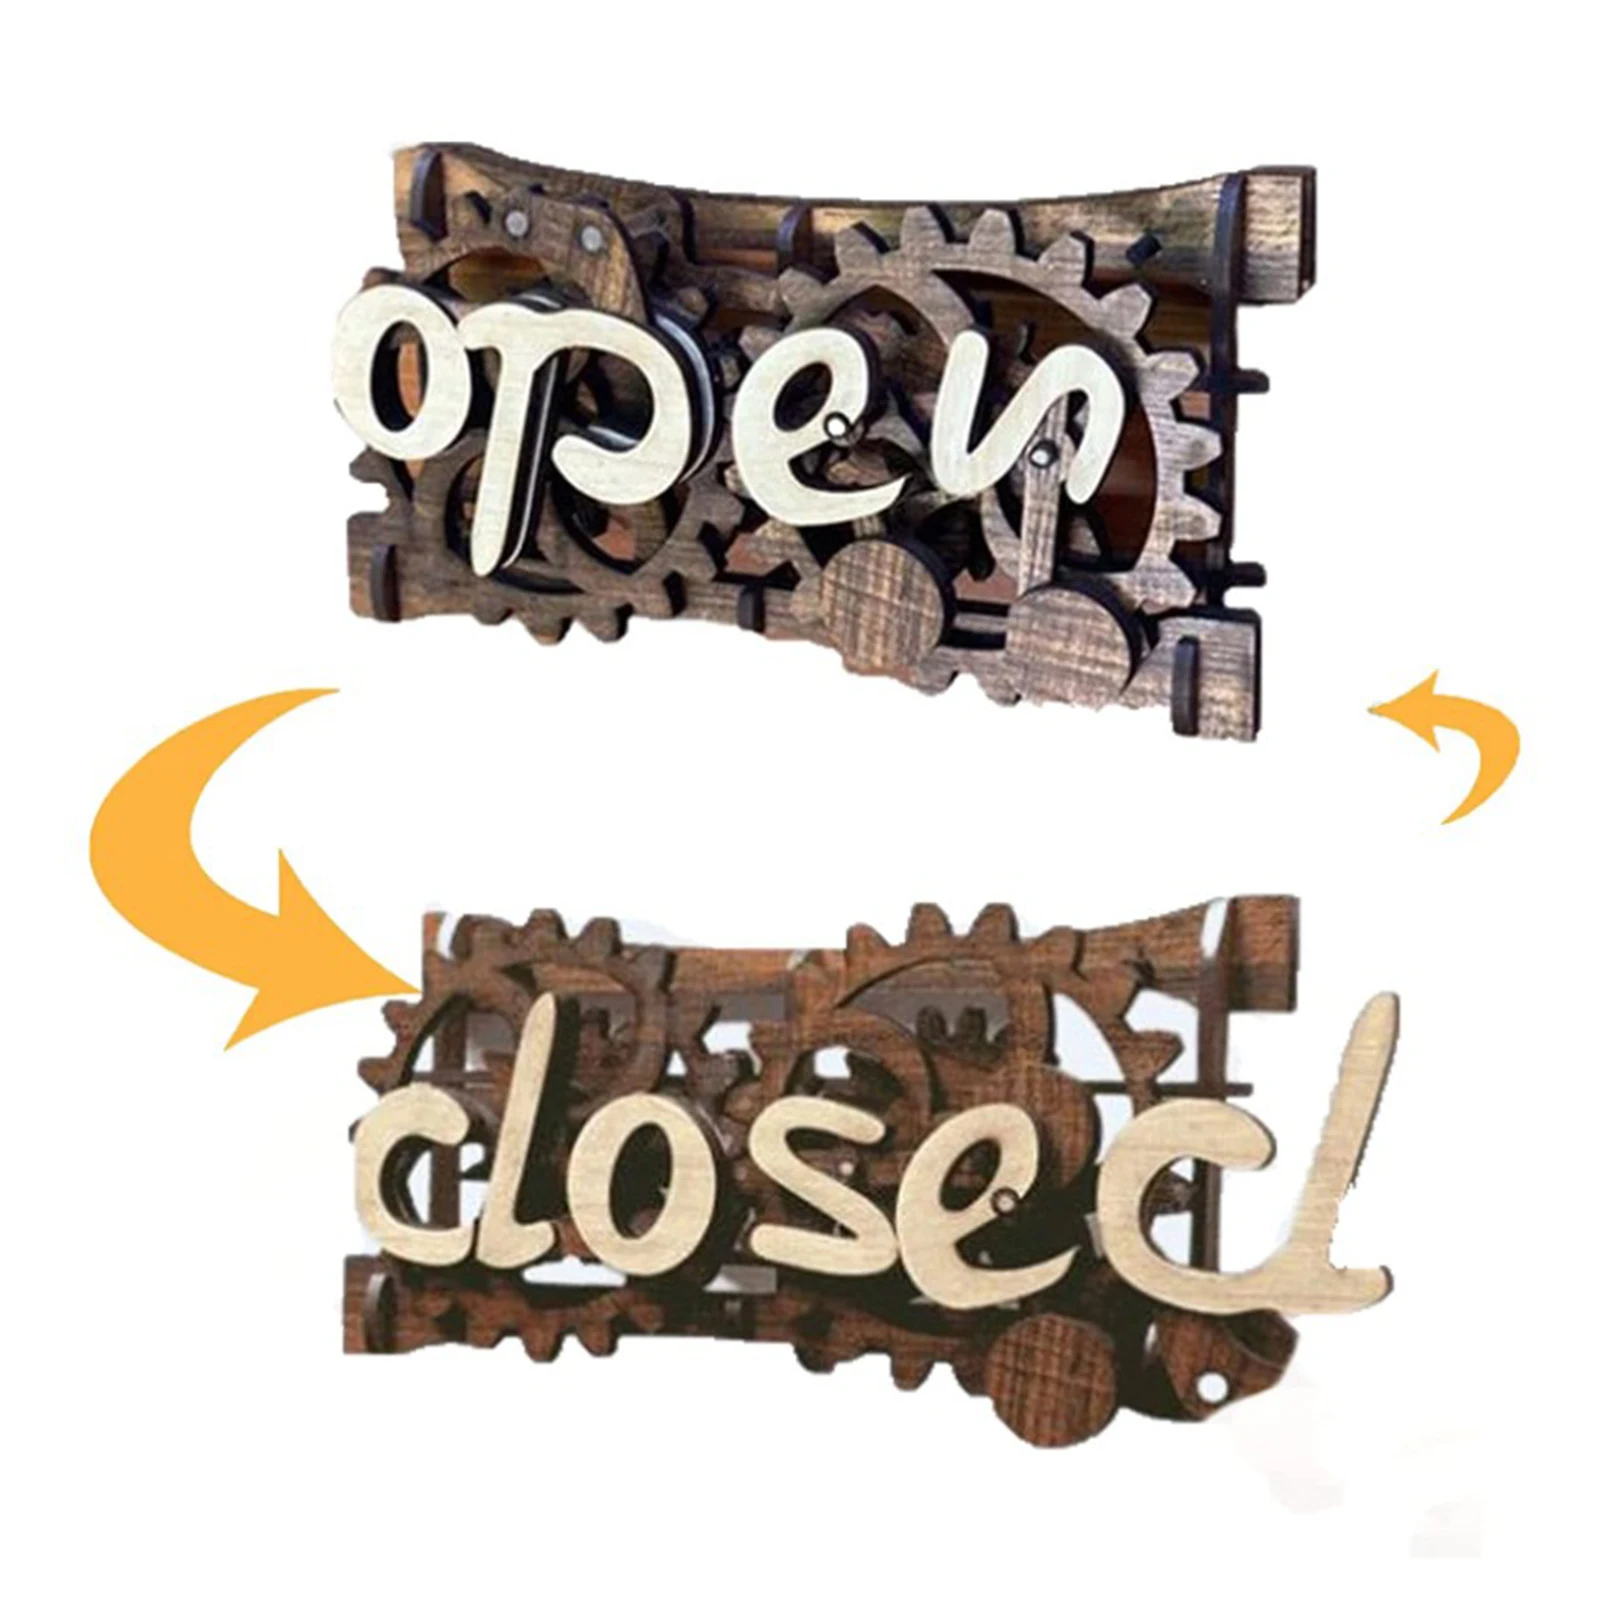 

Wooden Tenon Open-closed Gear Sign Reversible Gear Business Closing Sign Shop Plaques Billboard Home Decor Ornaments